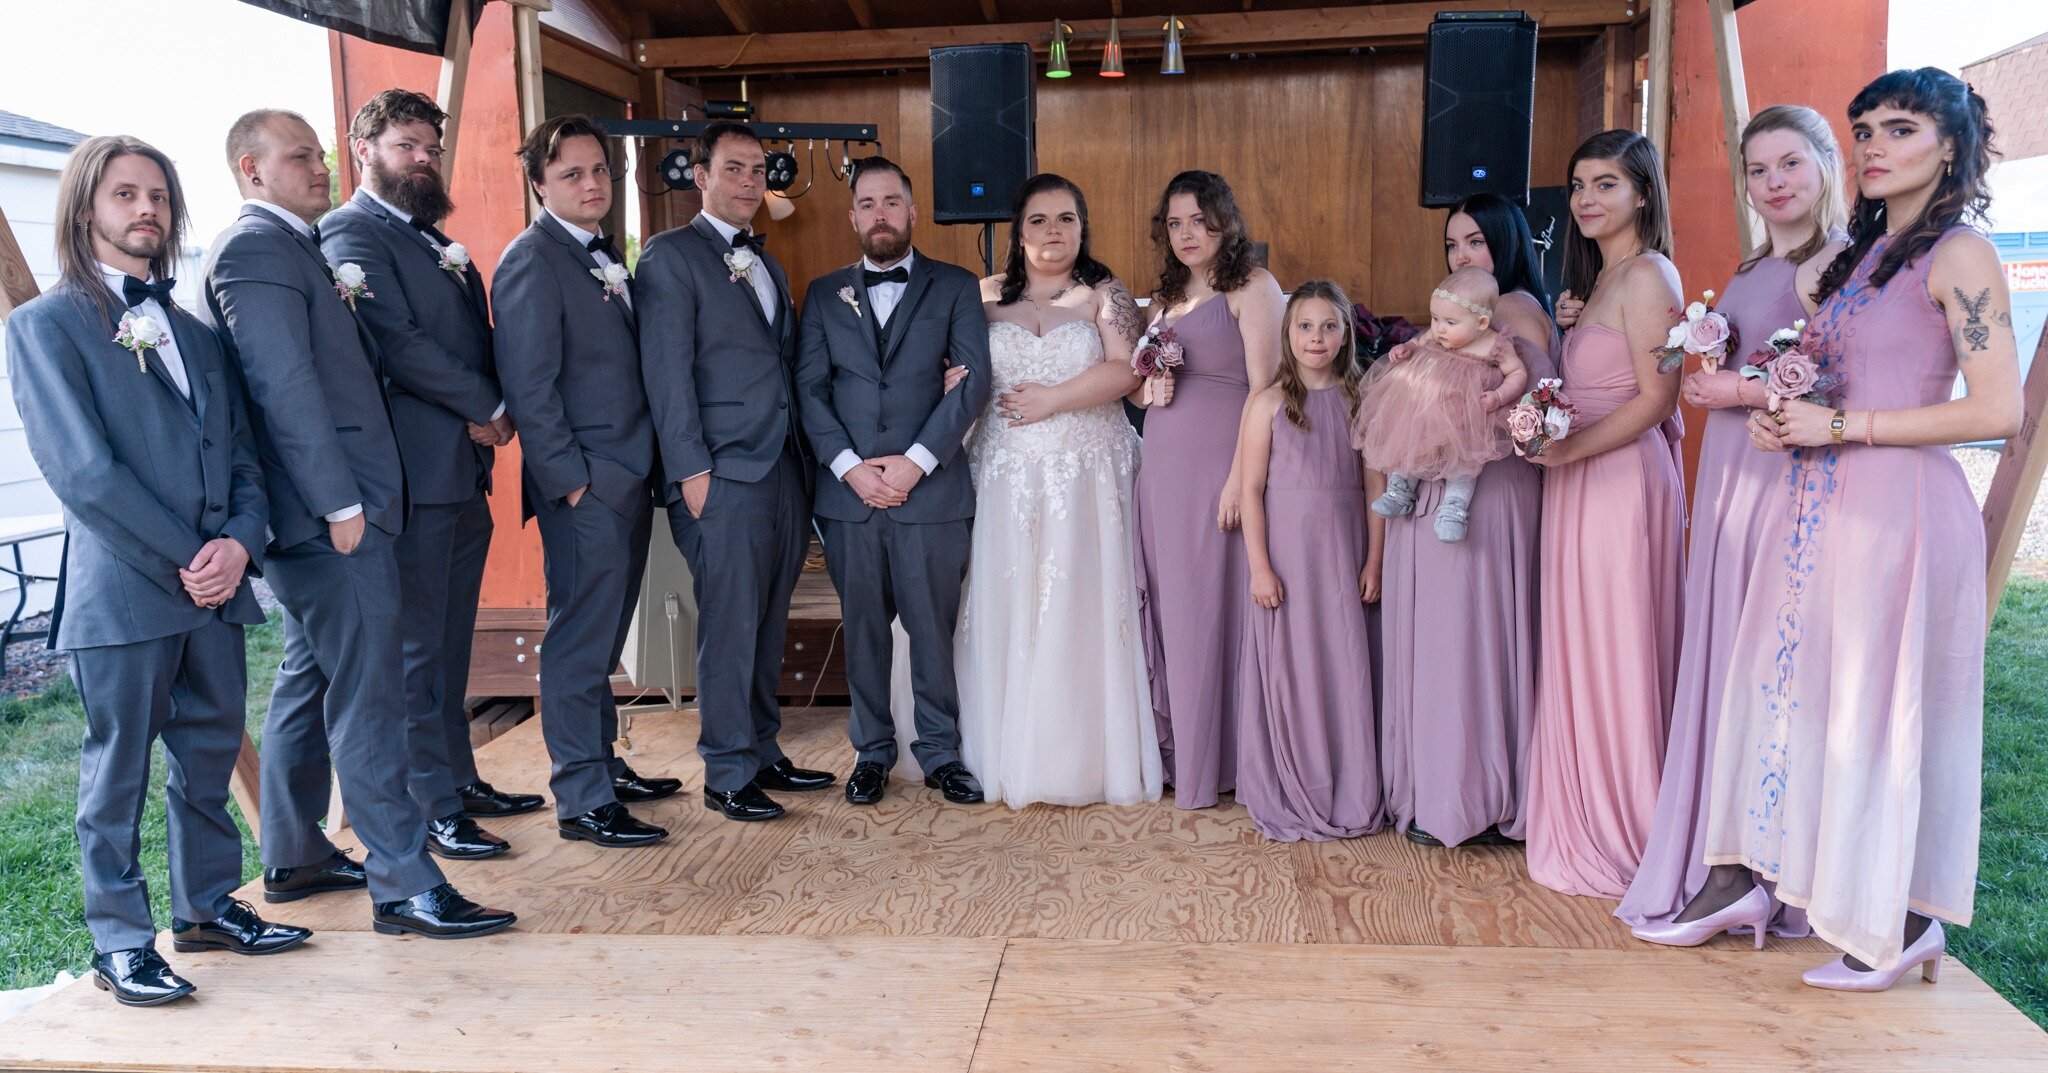 Why so serious? 😐

SWIPE for a not so serious result! 😁
&bull;
&bull;
&bull;
&bull;
&bull;
&bull;
#weddingphotographer #weddingphotographers
#torontoweddingphotographer
#torontoengagementphotographer
#torontoeventphotographer #torontovideographer
#